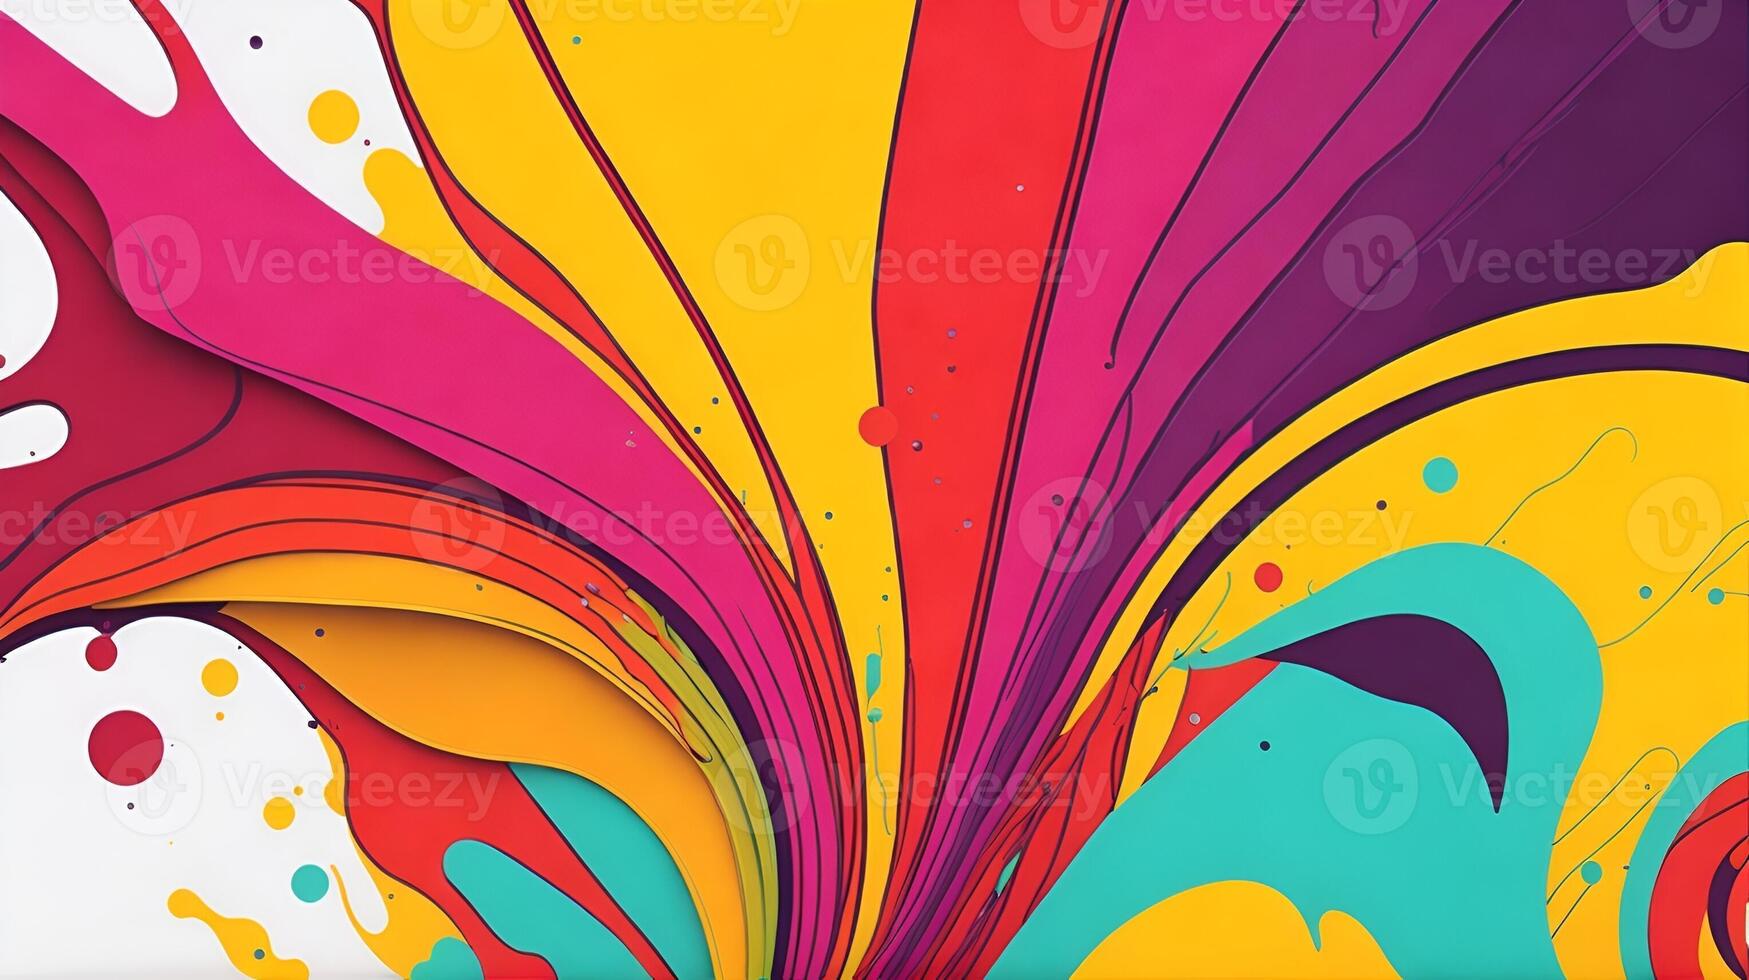 Abstract color texture modern futuristic pattern colorful background splash of bright colors photo